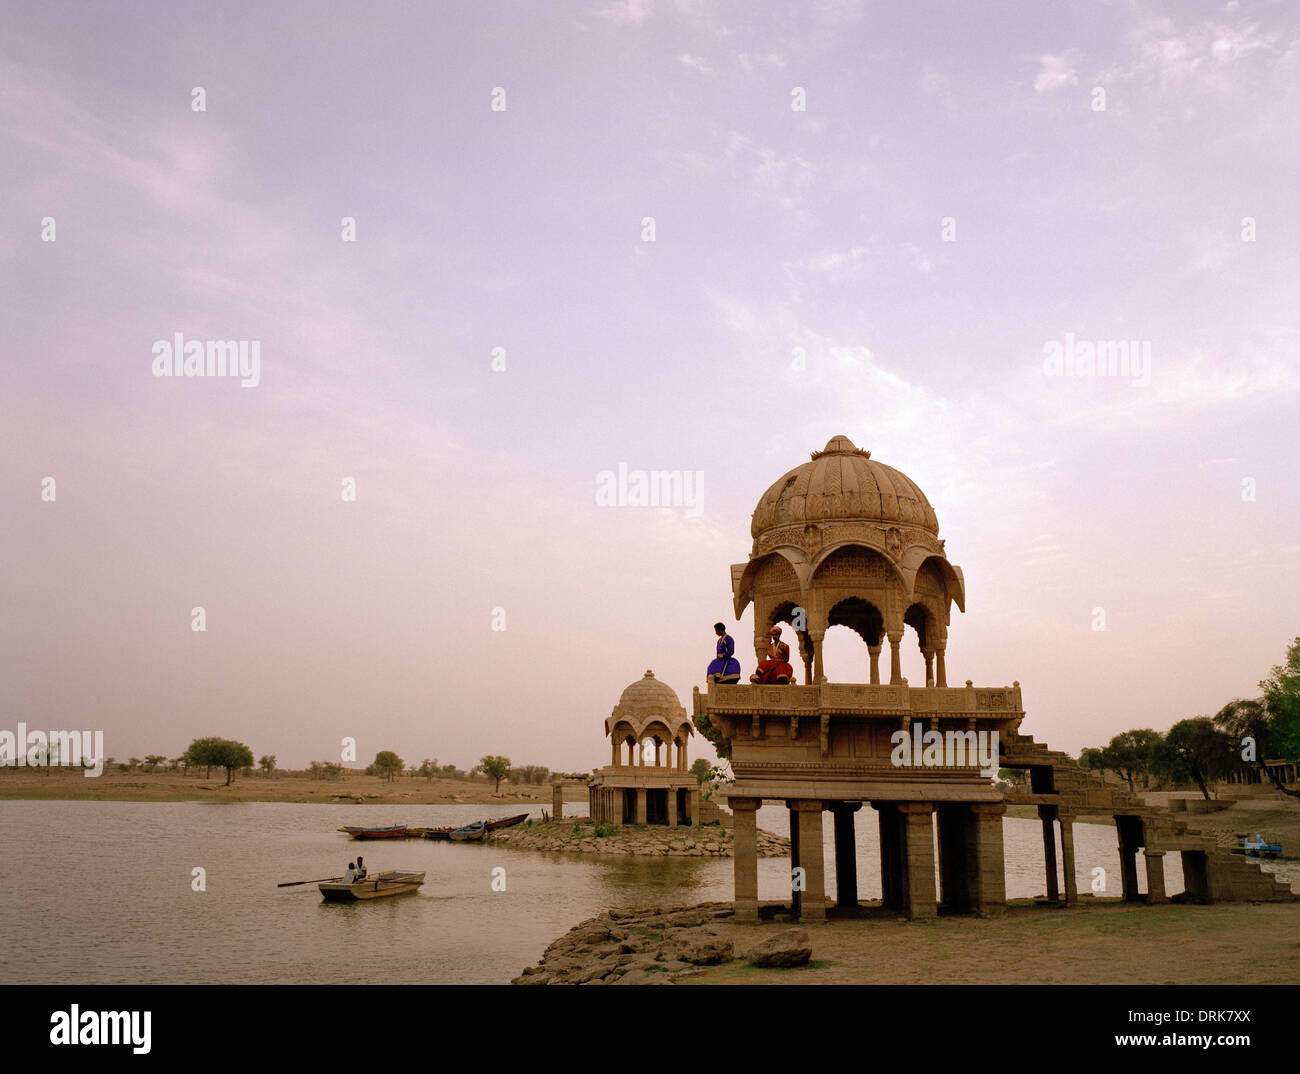 Gadisar Lake in Jaisalmer in Rajasthan in India in South Asia. Serenity Landscape Tranquillity Peace Sky Beauty Travel Escapism Wanderlust Stock Photo